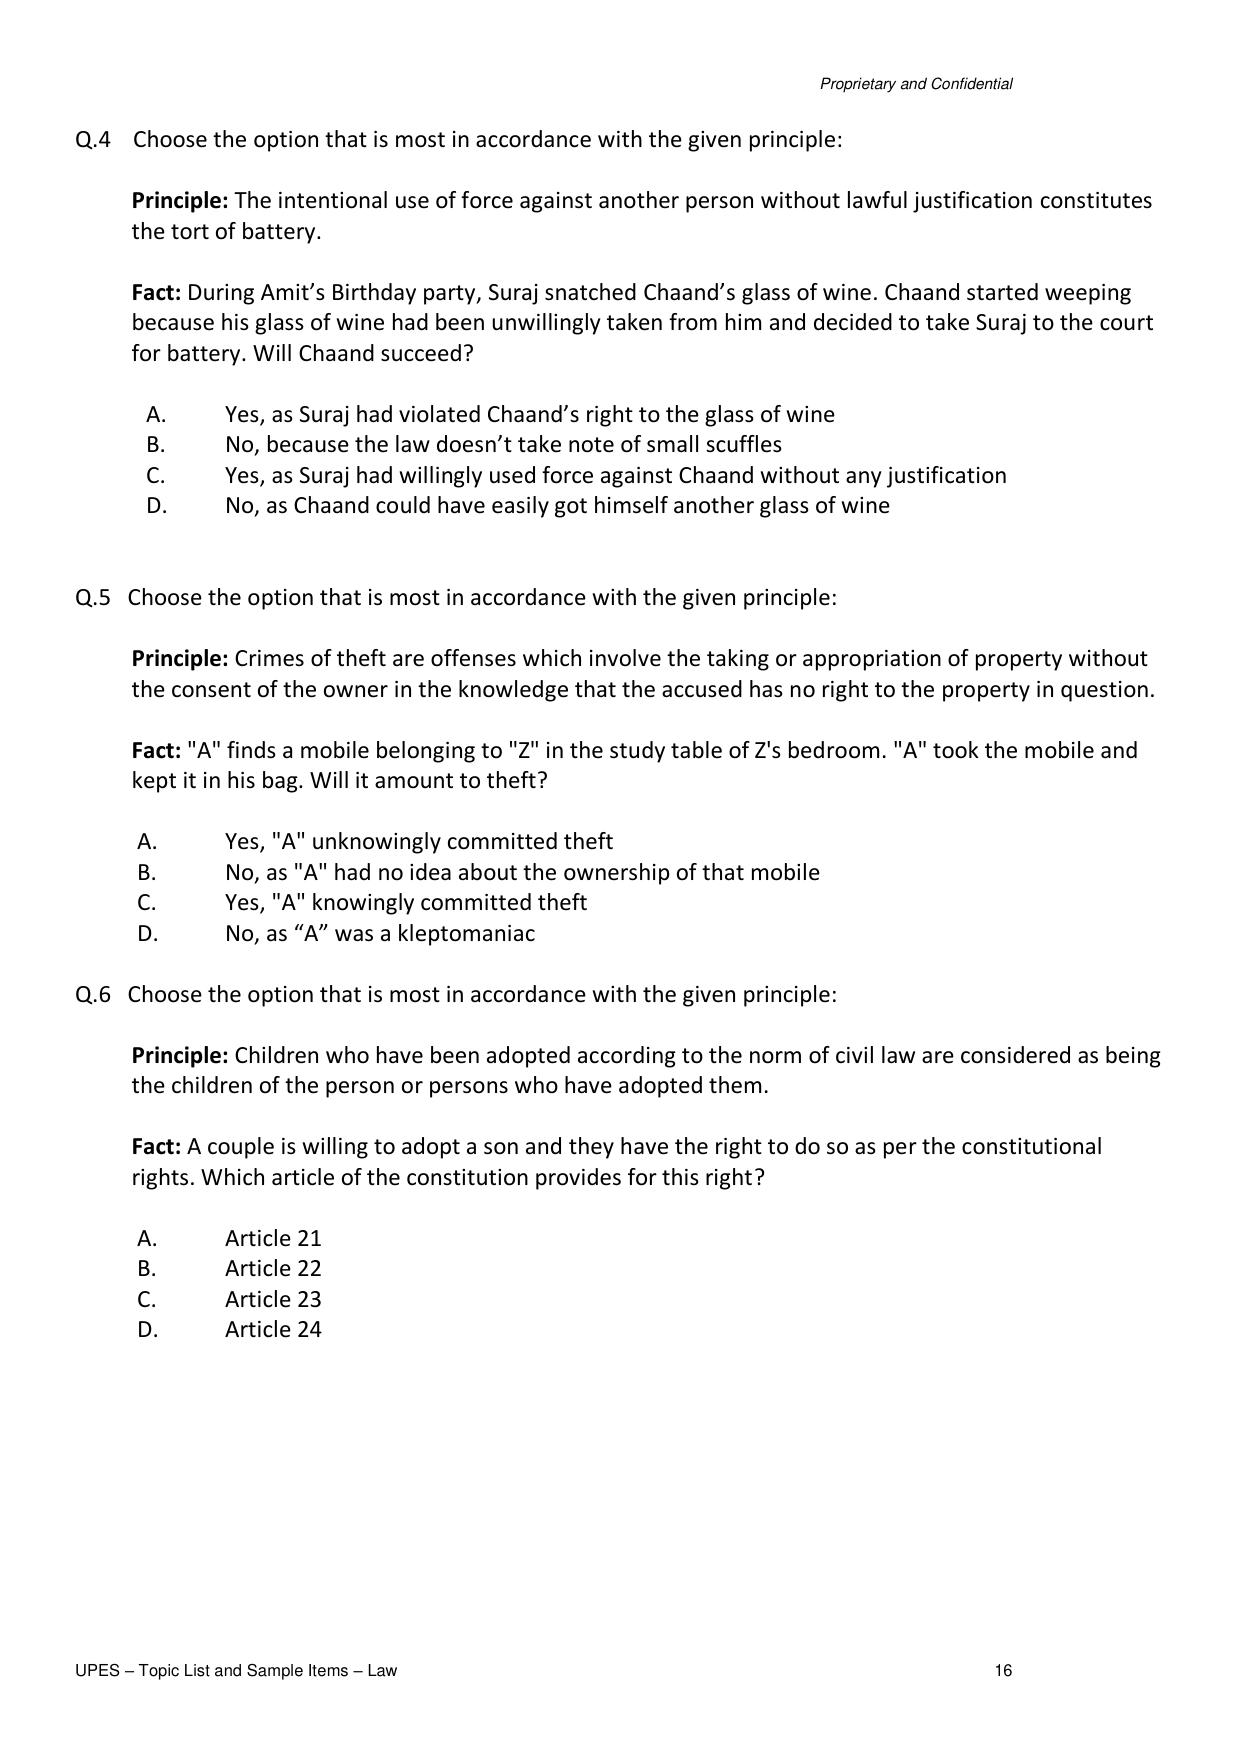 UPES Law Sample Papers - Page 16